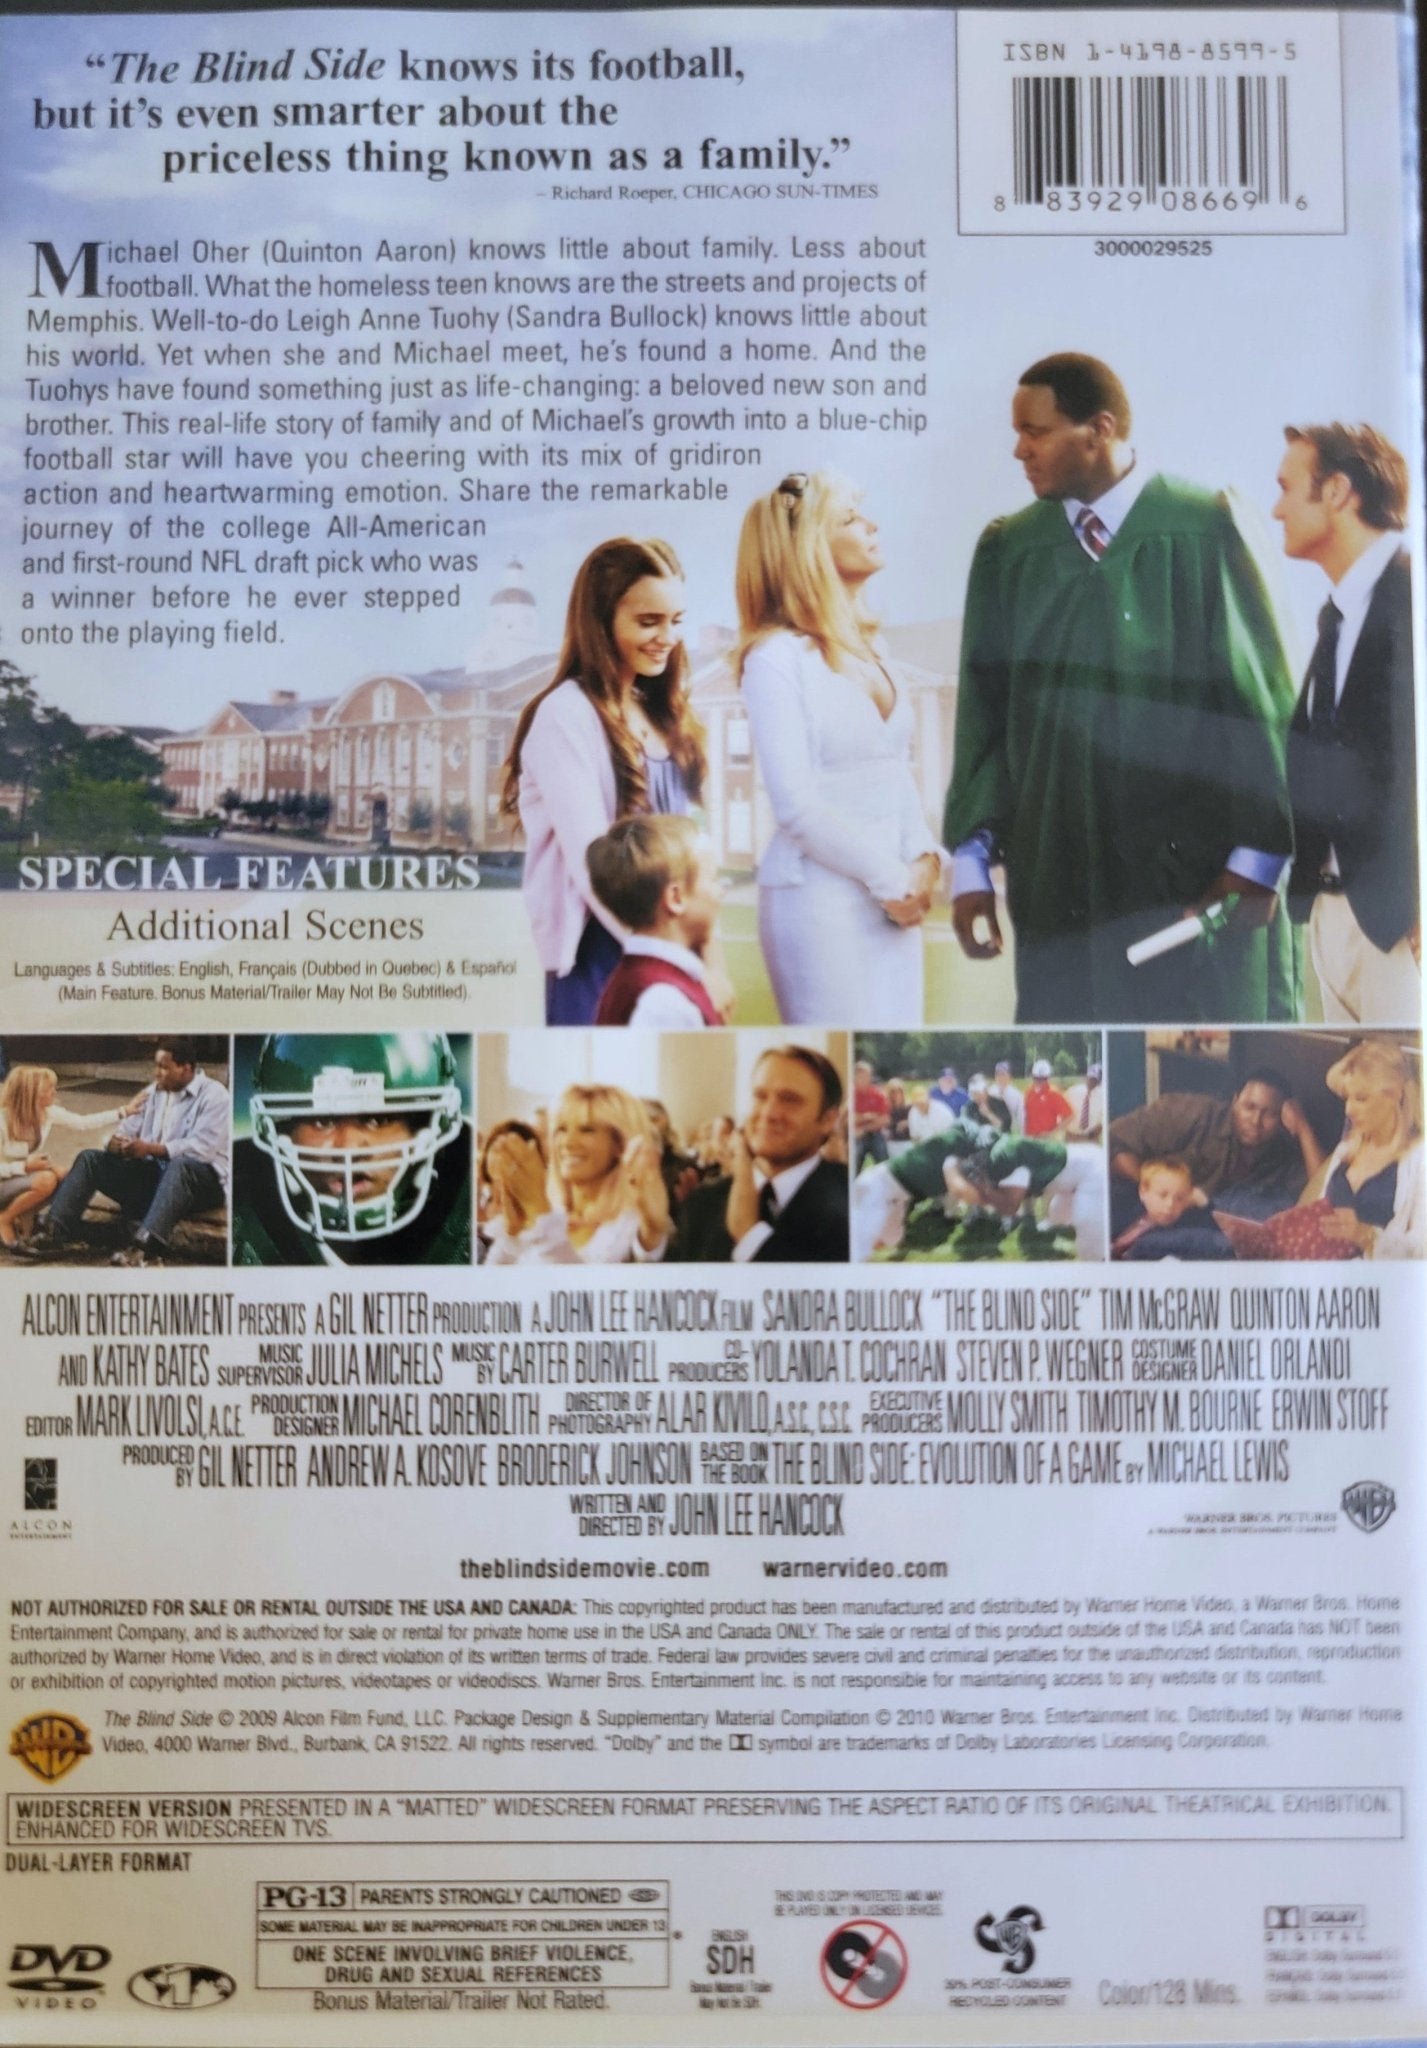 Warner Brothers - The Blind Side | DVD | Widescreen - DVD - Steady Bunny Shop